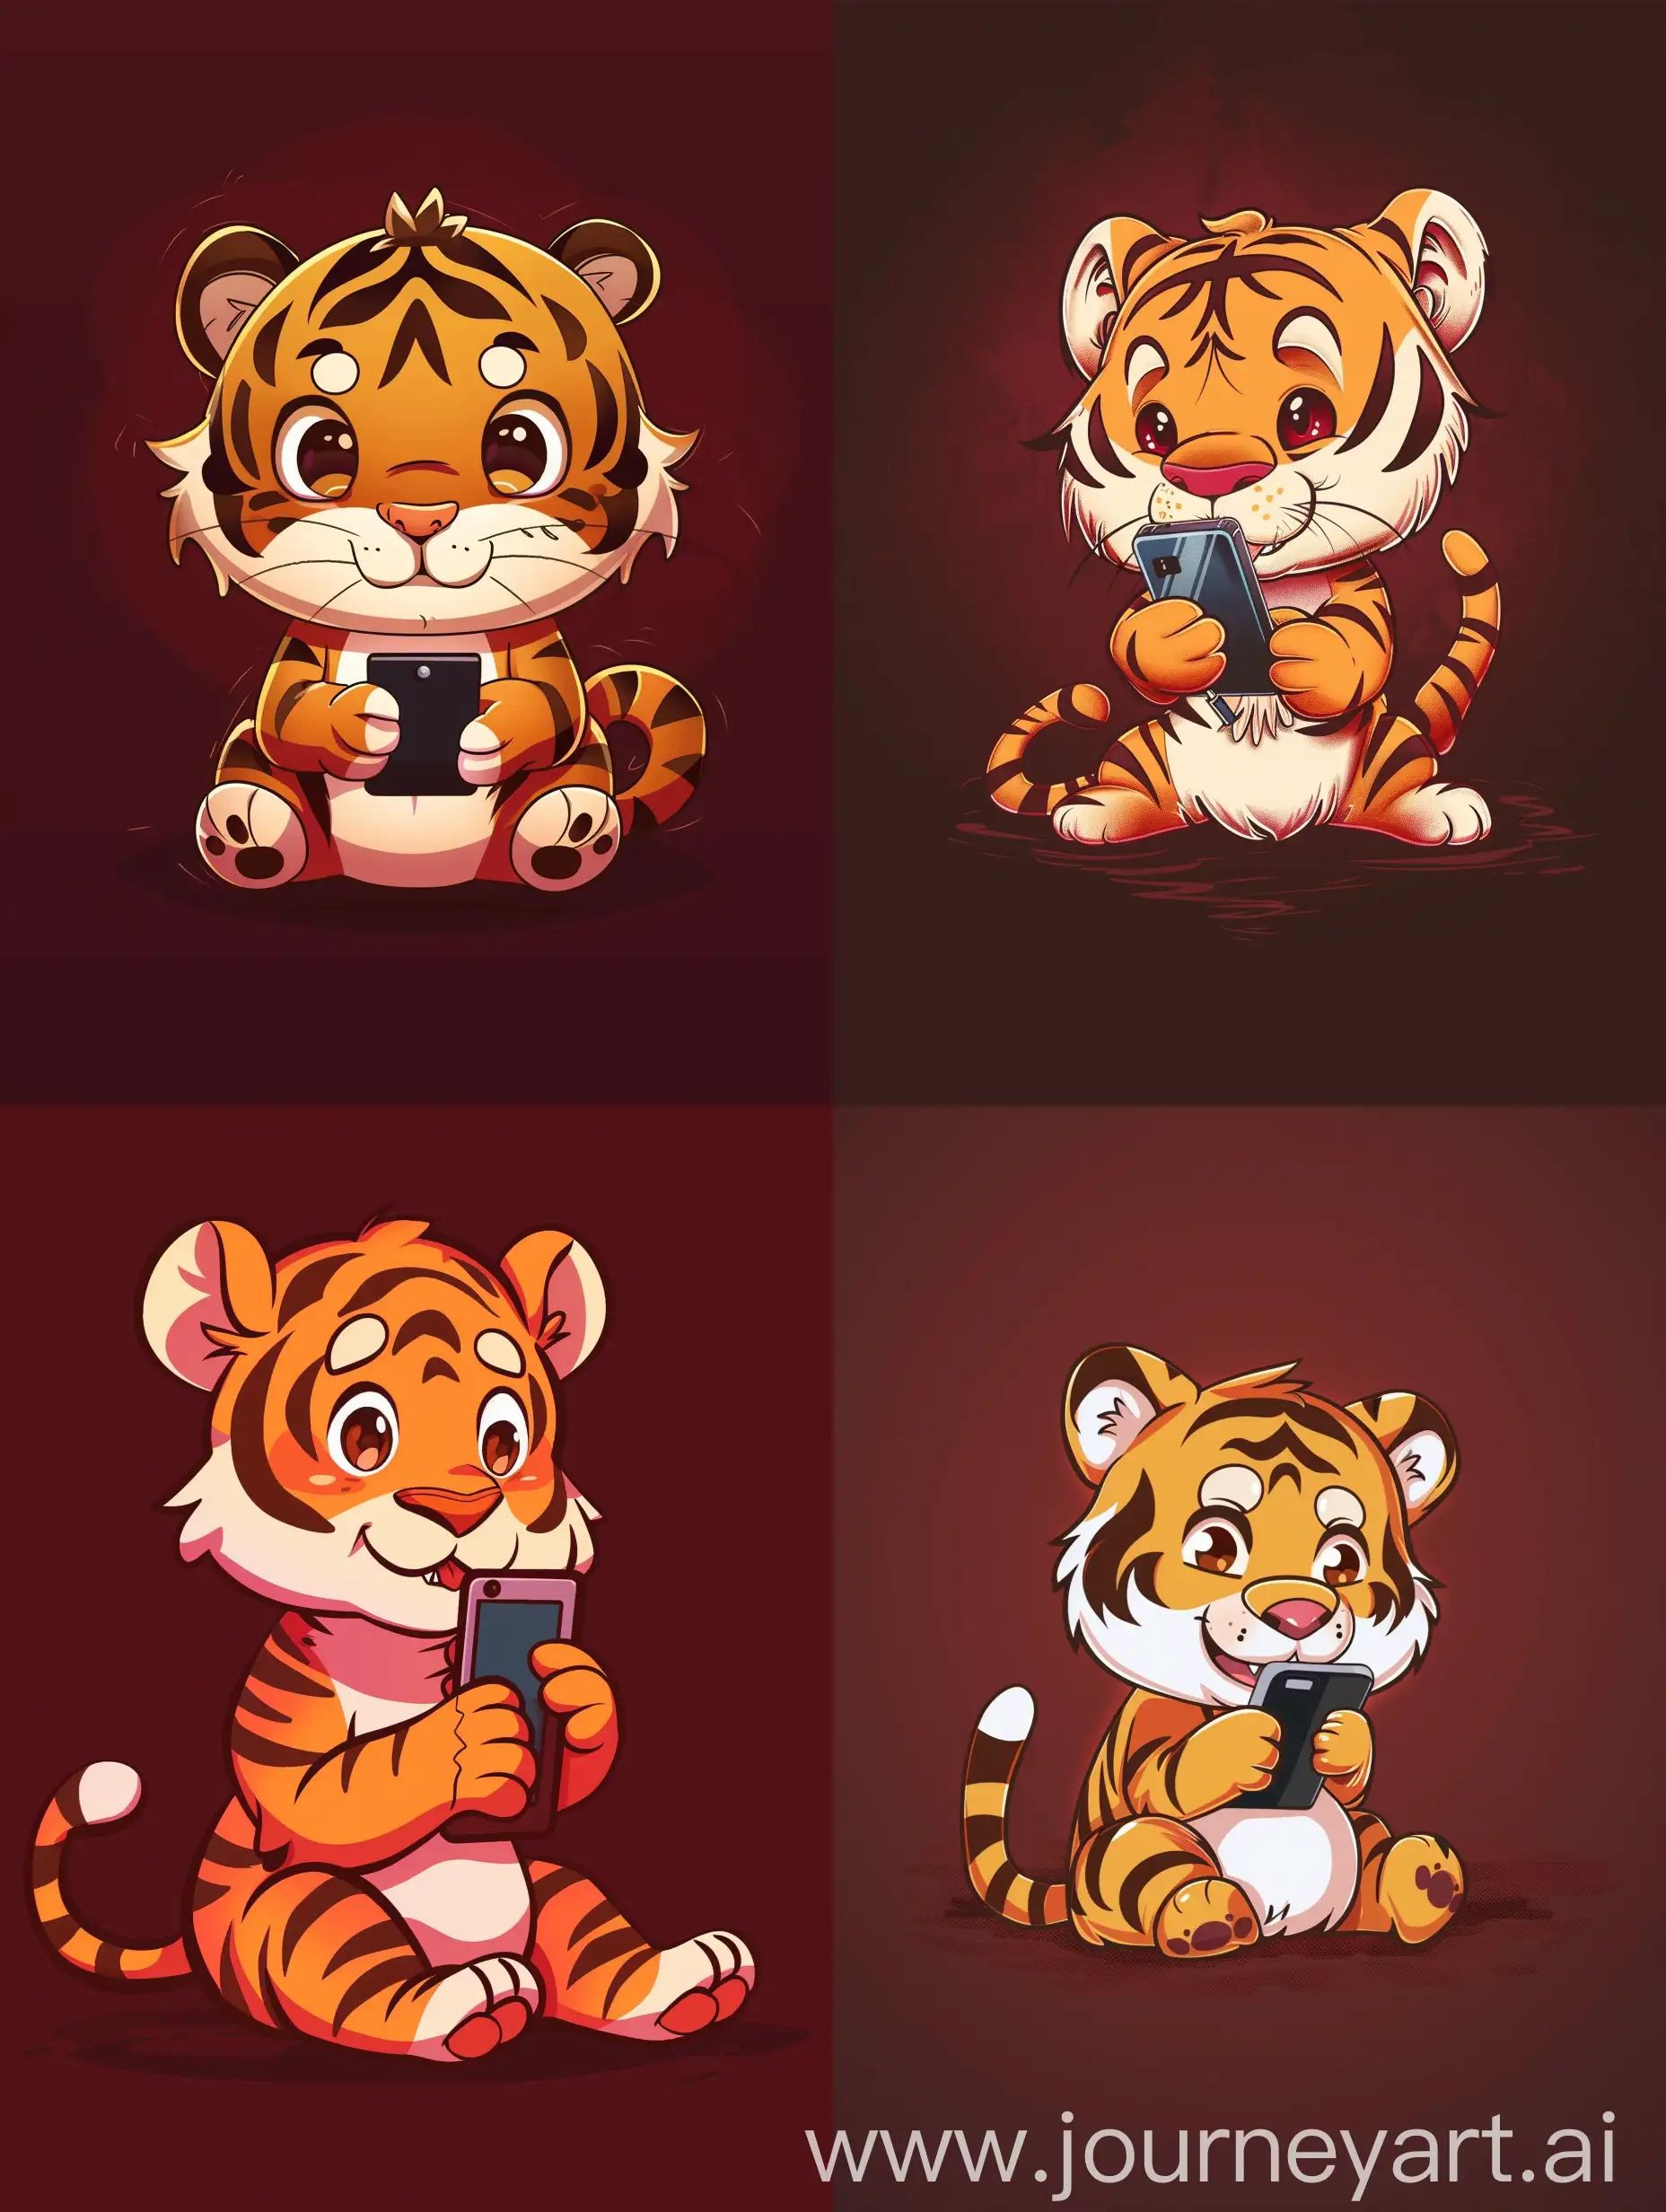 Chibi-Cute-Tiger-Playing-Smartphone-on-Dark-Red-Background